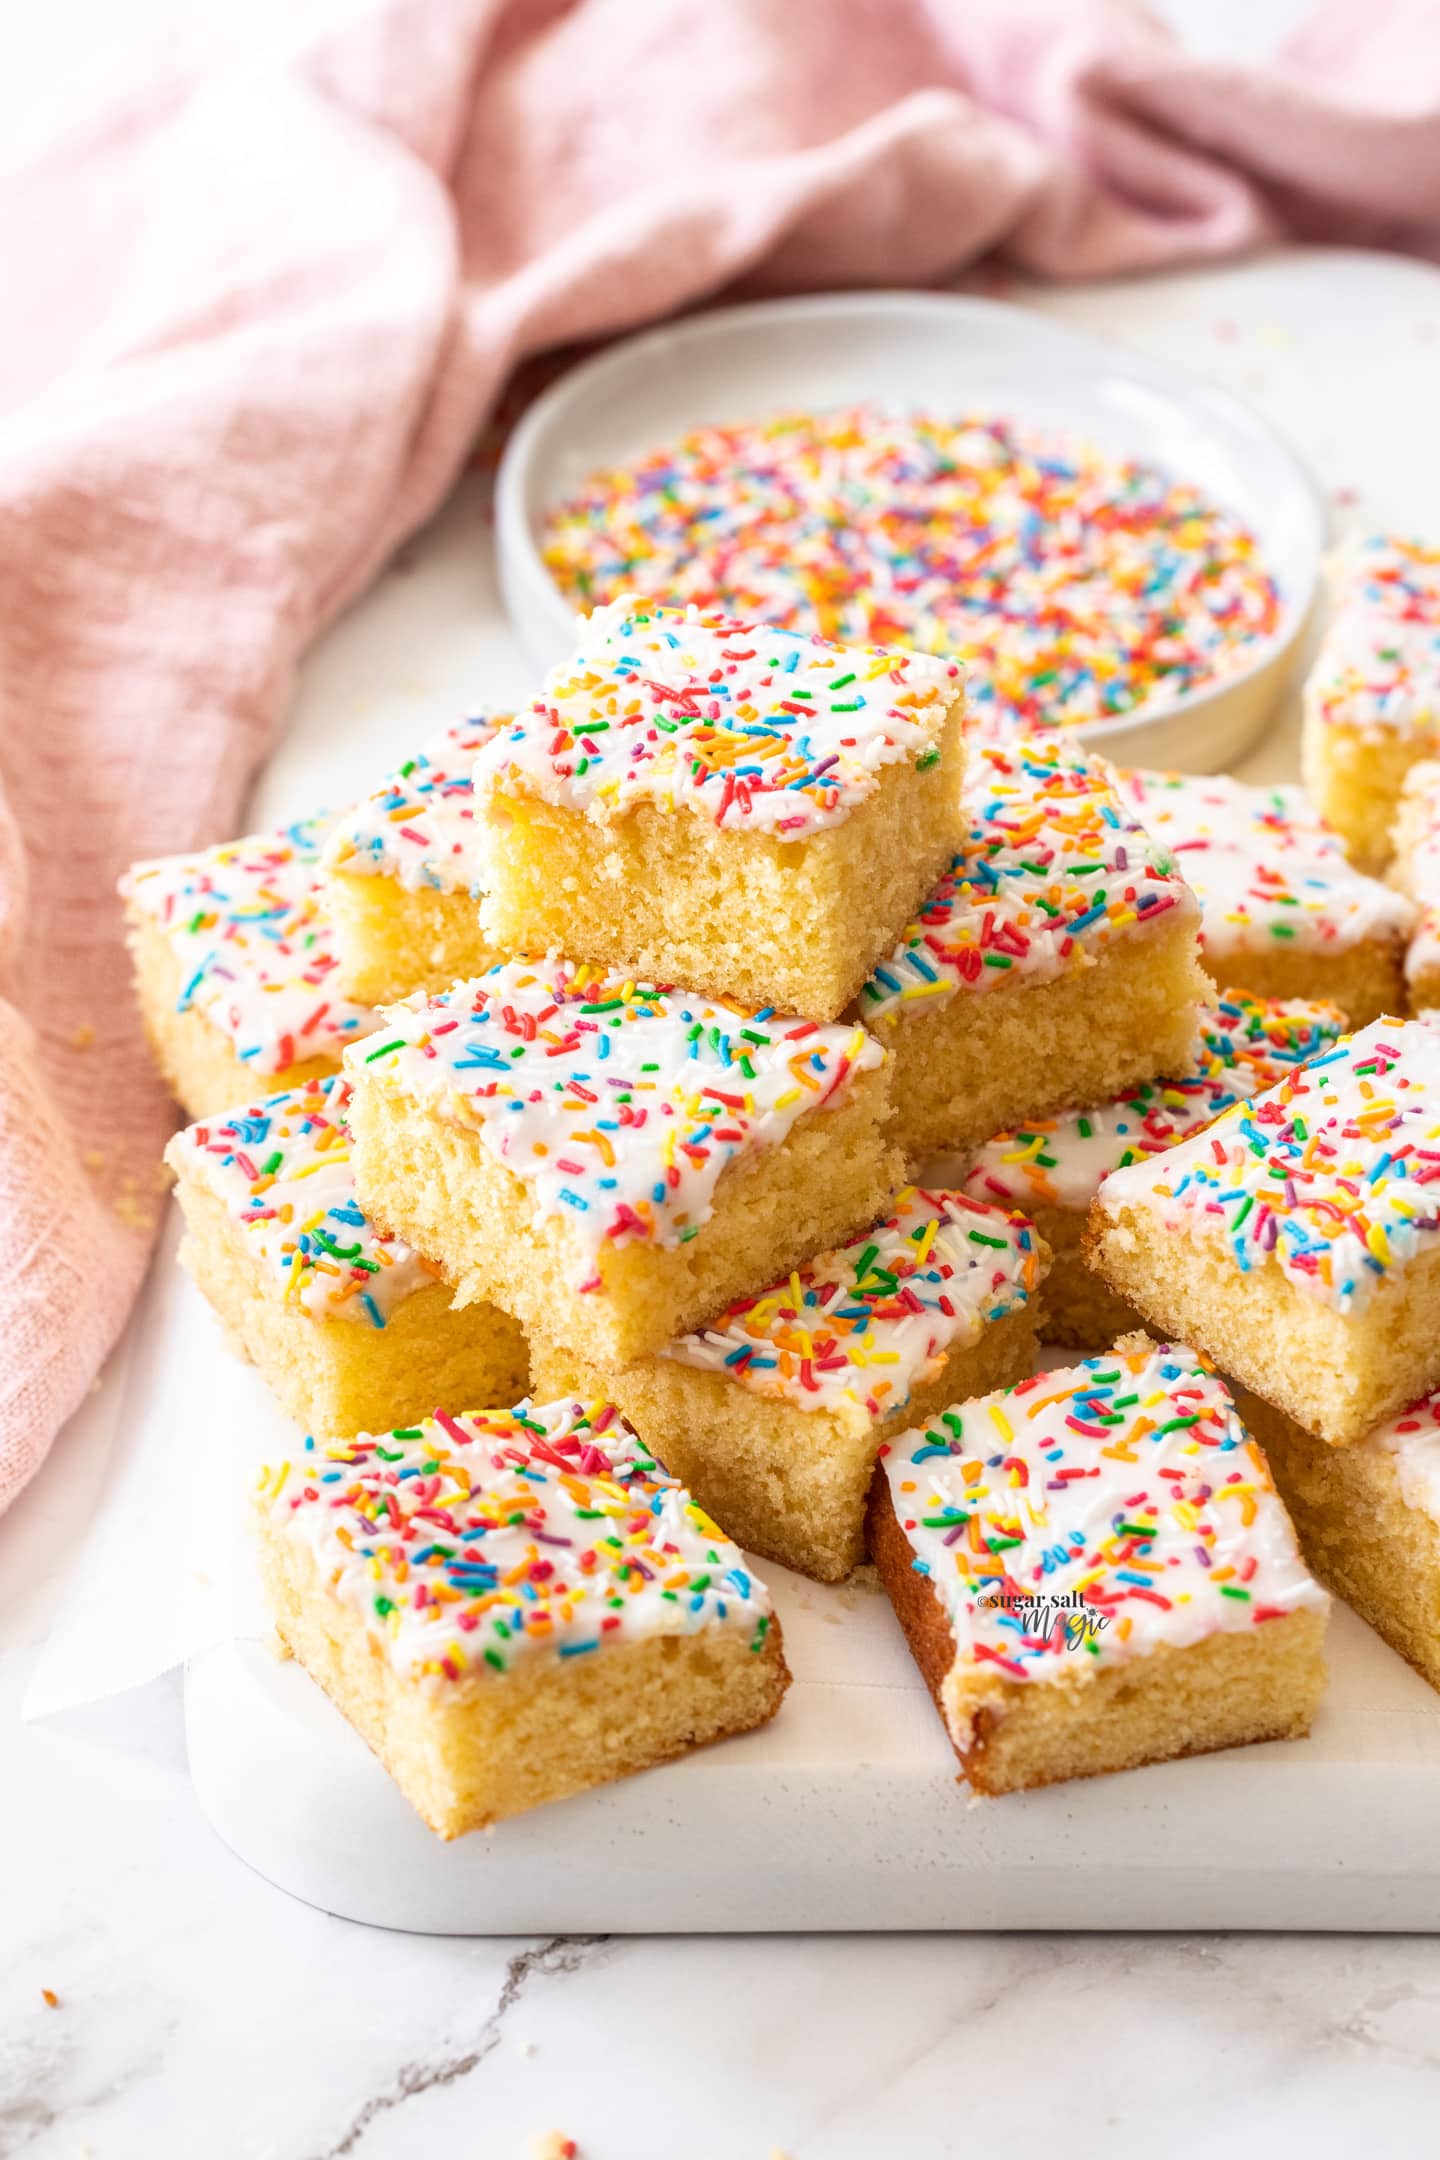 A stack of squares of sponge tray bake toped with sprinkles.